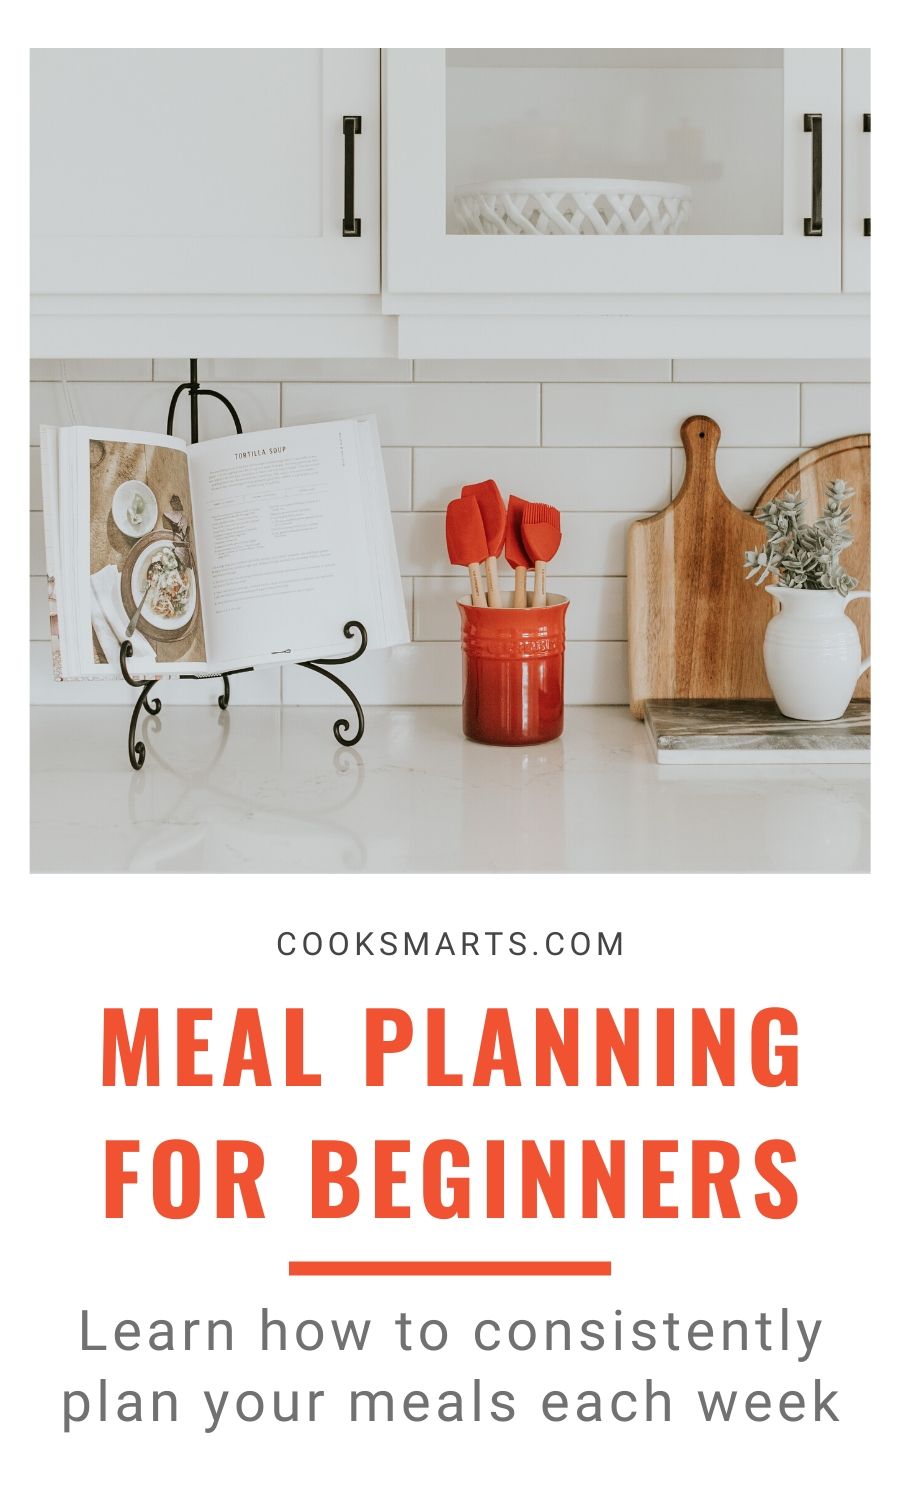 Best Meal Planning Strategies for Your Lifestyle | Cook Smarts